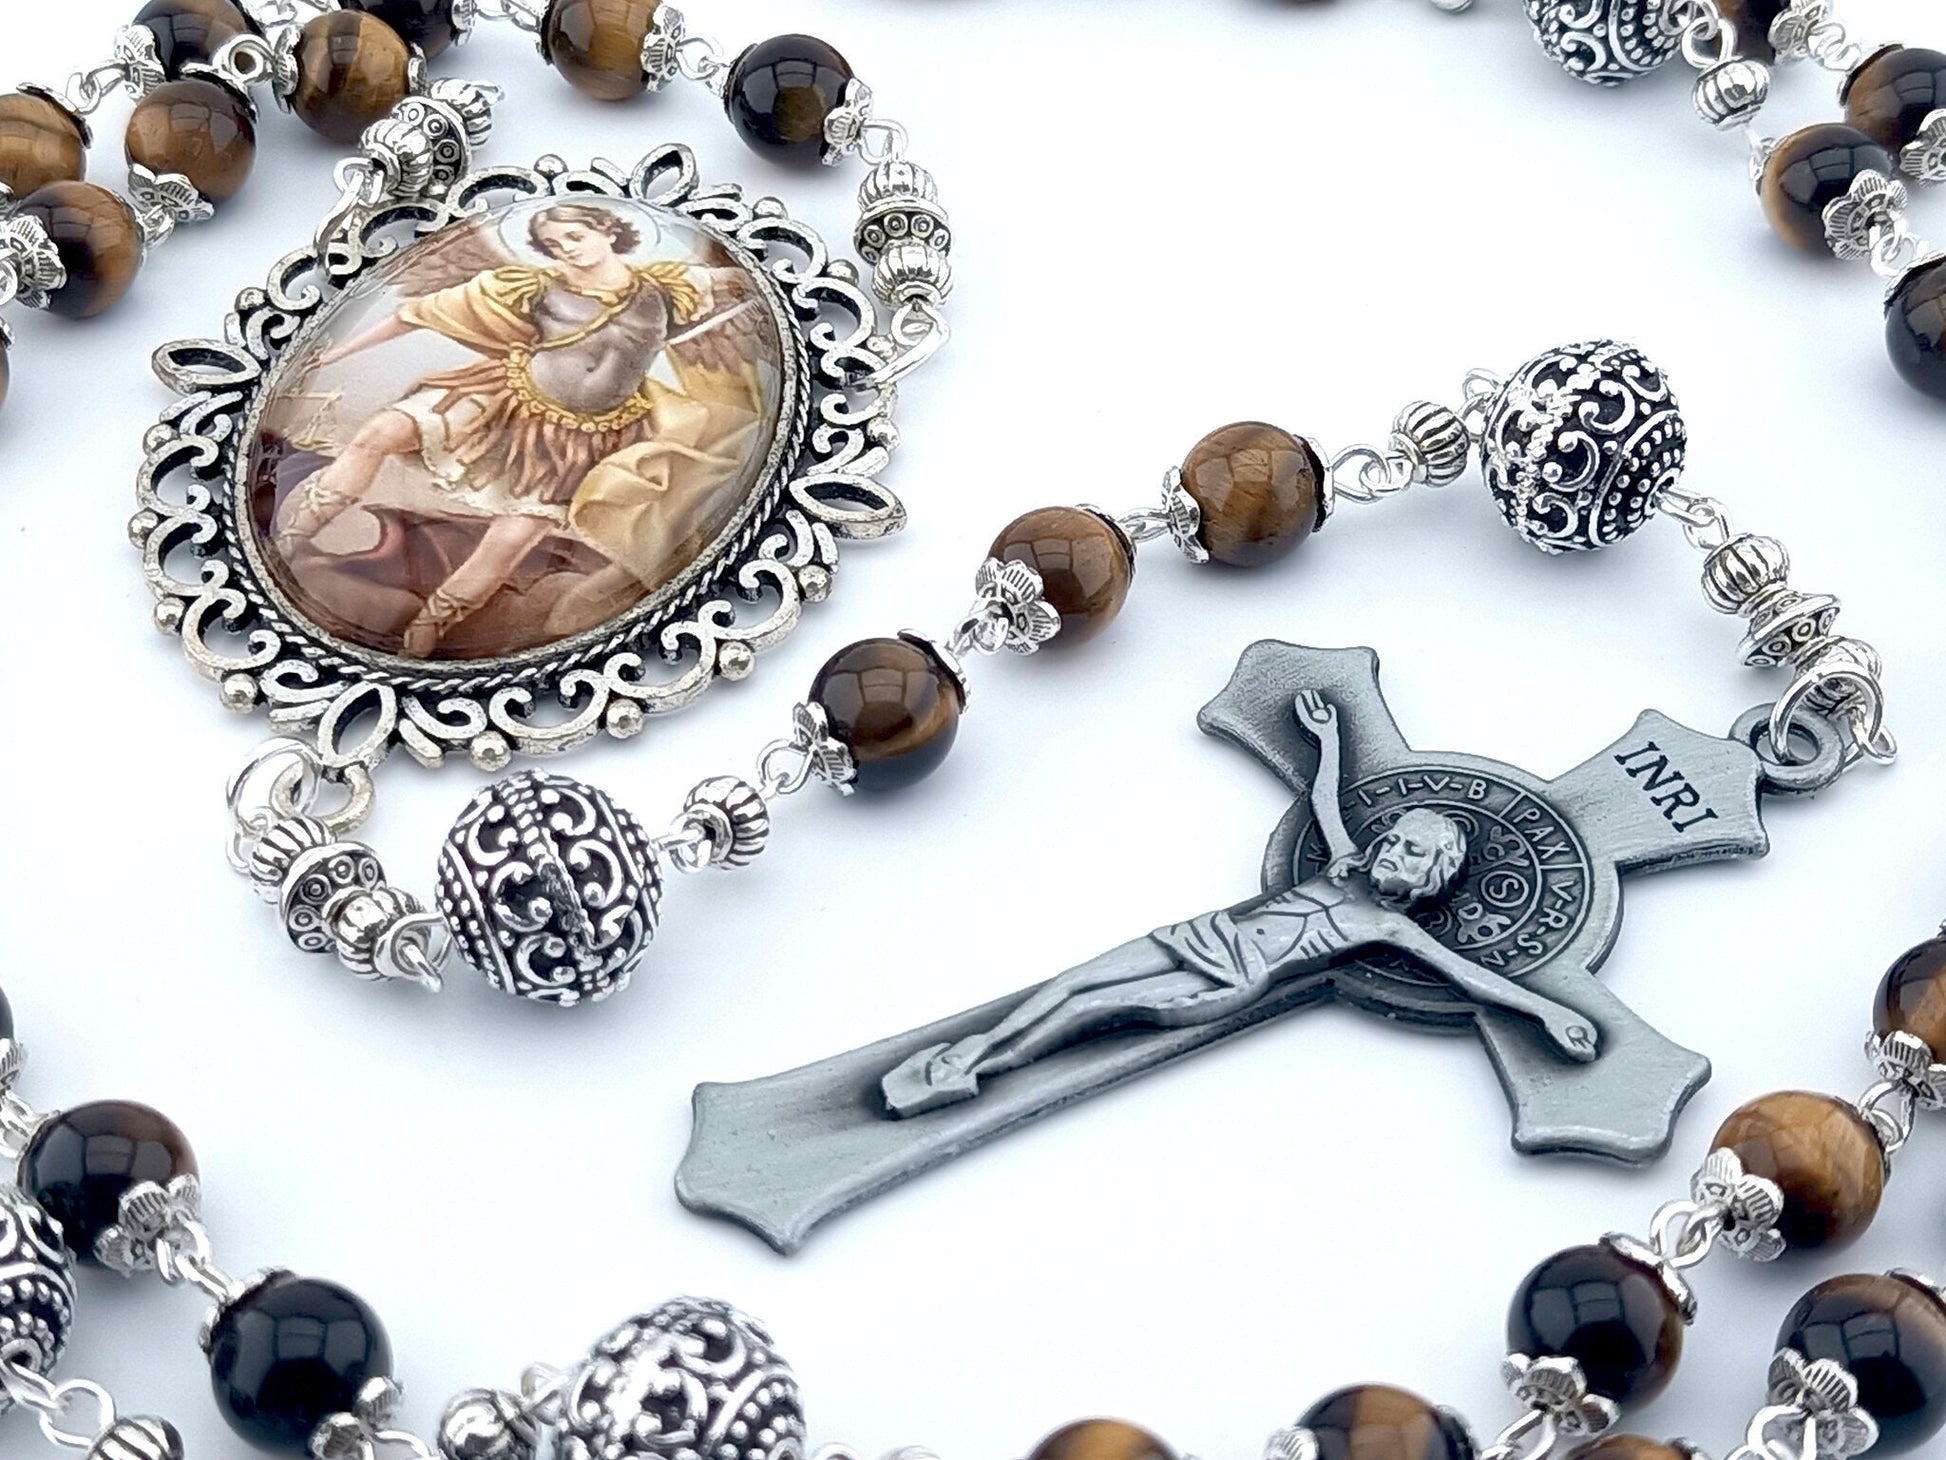 Saint Michael the Archangel unique rosary beads with tigers eye gemstone beads, silver pater beads, Saint Benedict crucifix and picture centre medal.